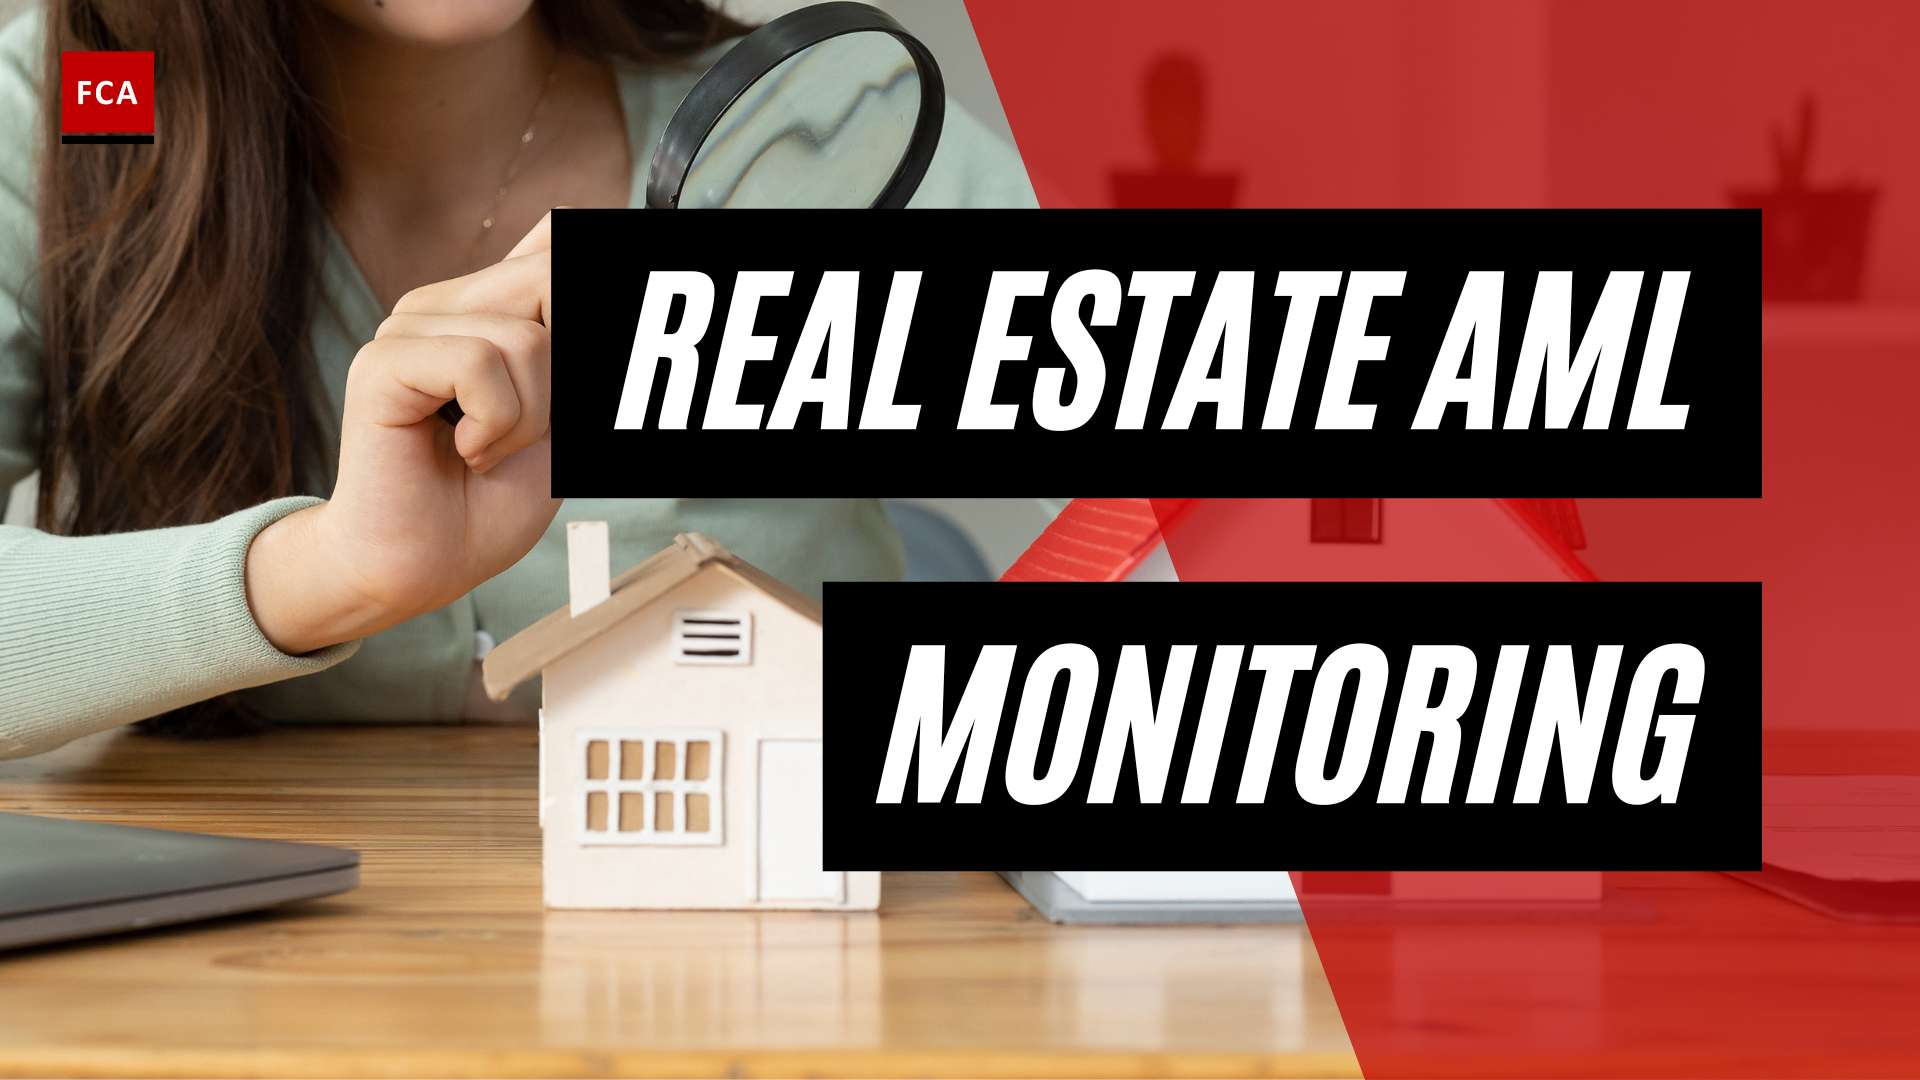 Guarding Your Transactions: Real Estate Aml Monitoring Revealed